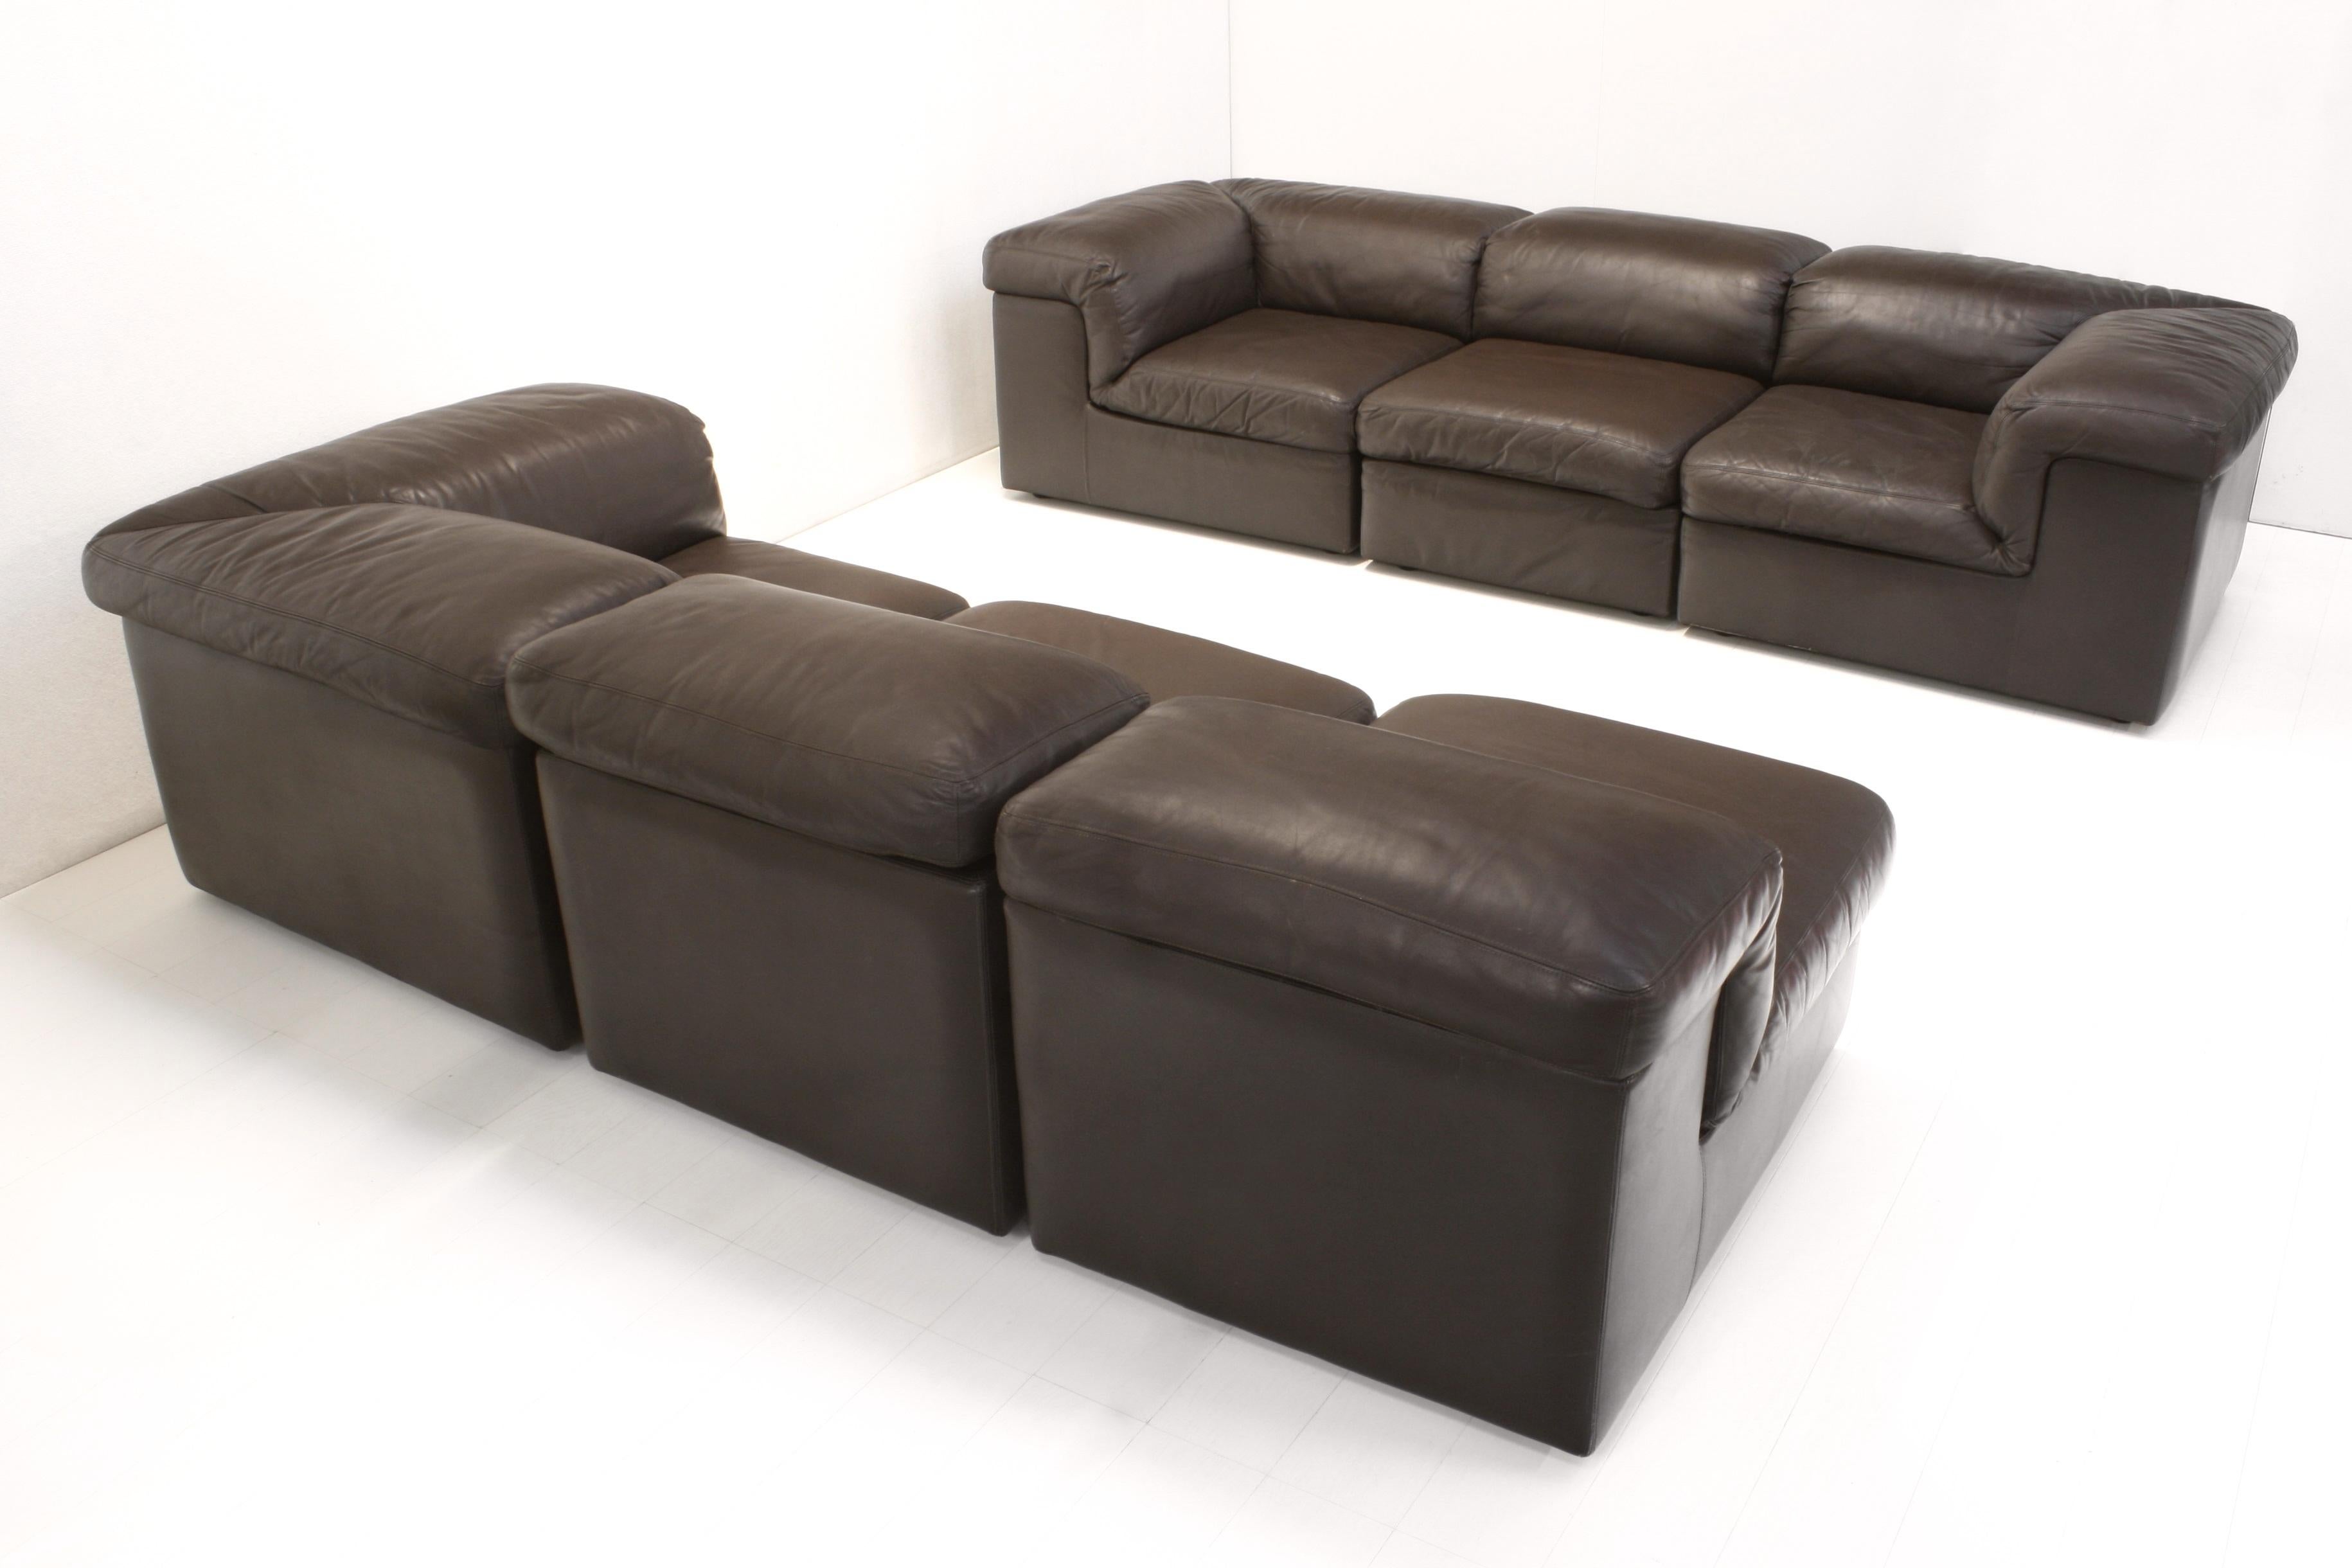 Modular Brown Leather Jeep Sectional Sofa by Anita Schmidt for Durlet, 1970s In Fair Condition For Sale In Izegem, VWV